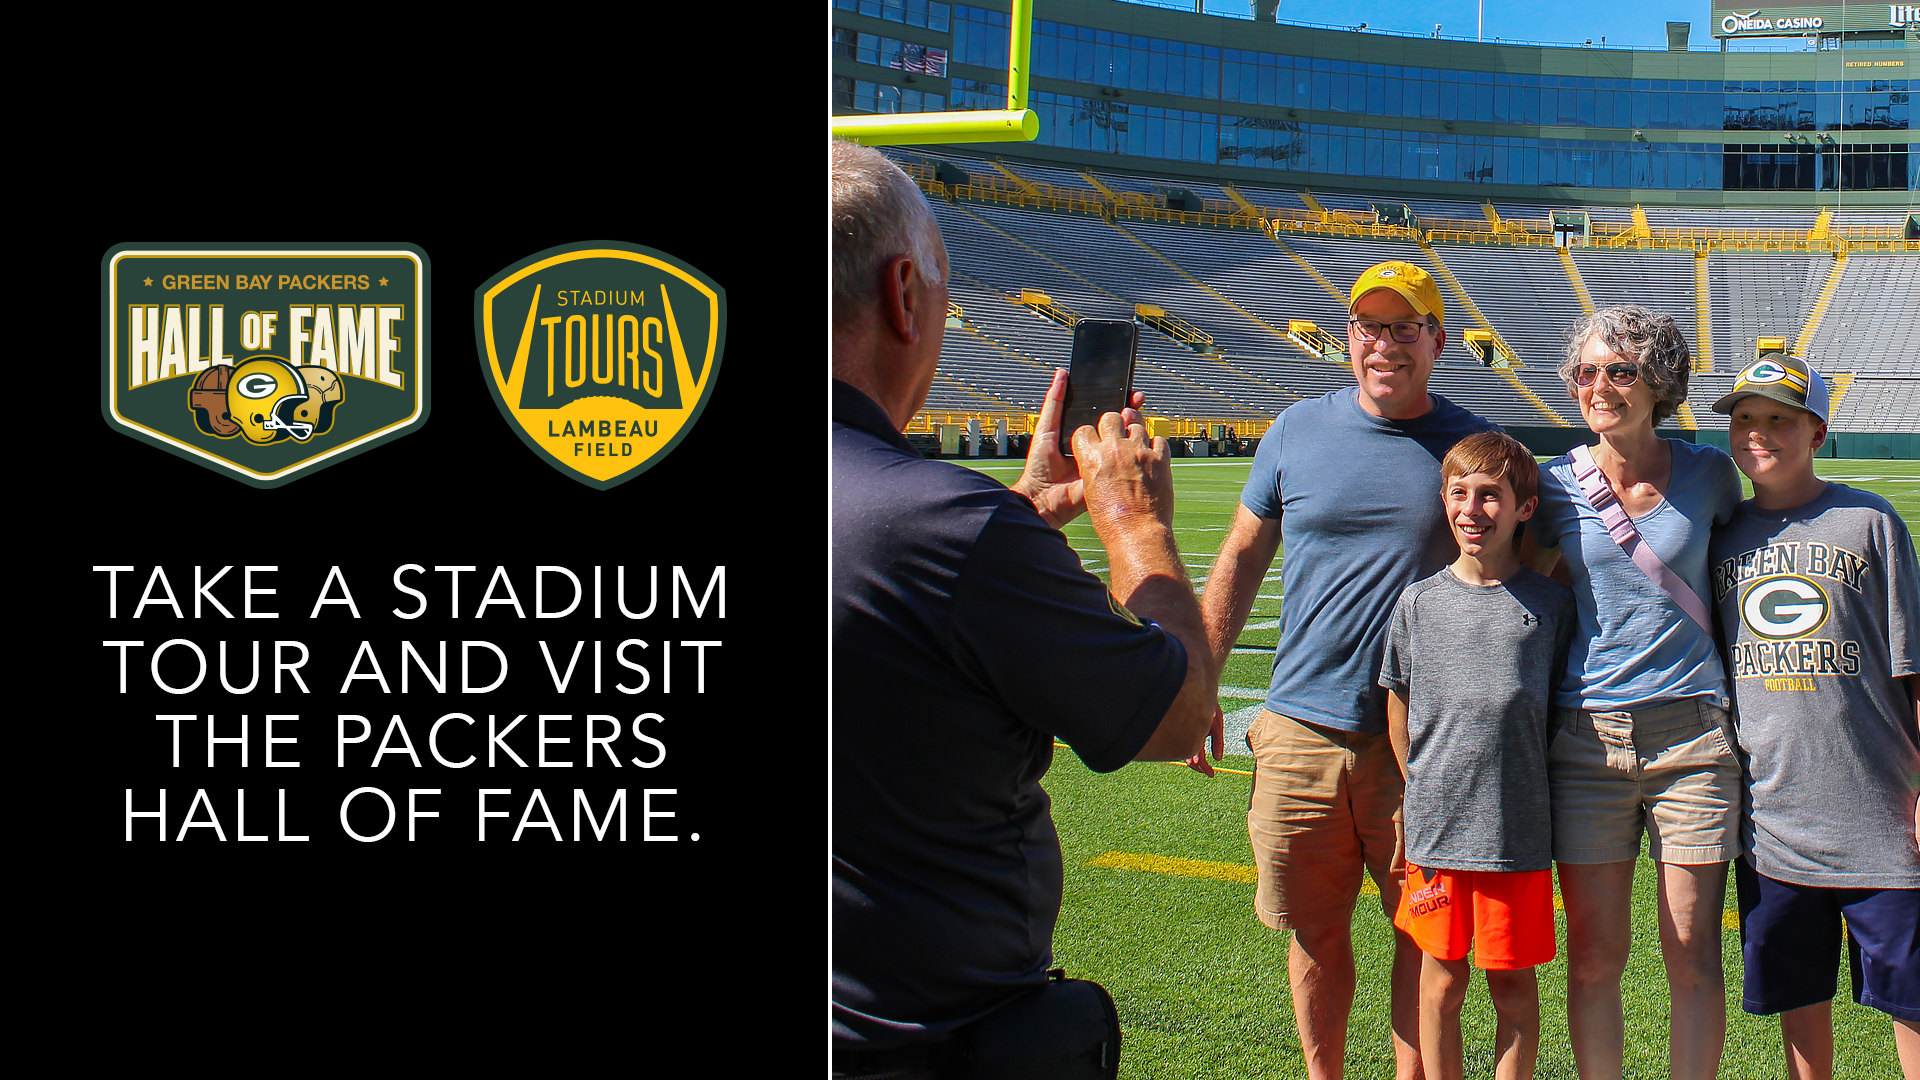 Home  Green Bay Packers Hall of Fame & Stadium Tours